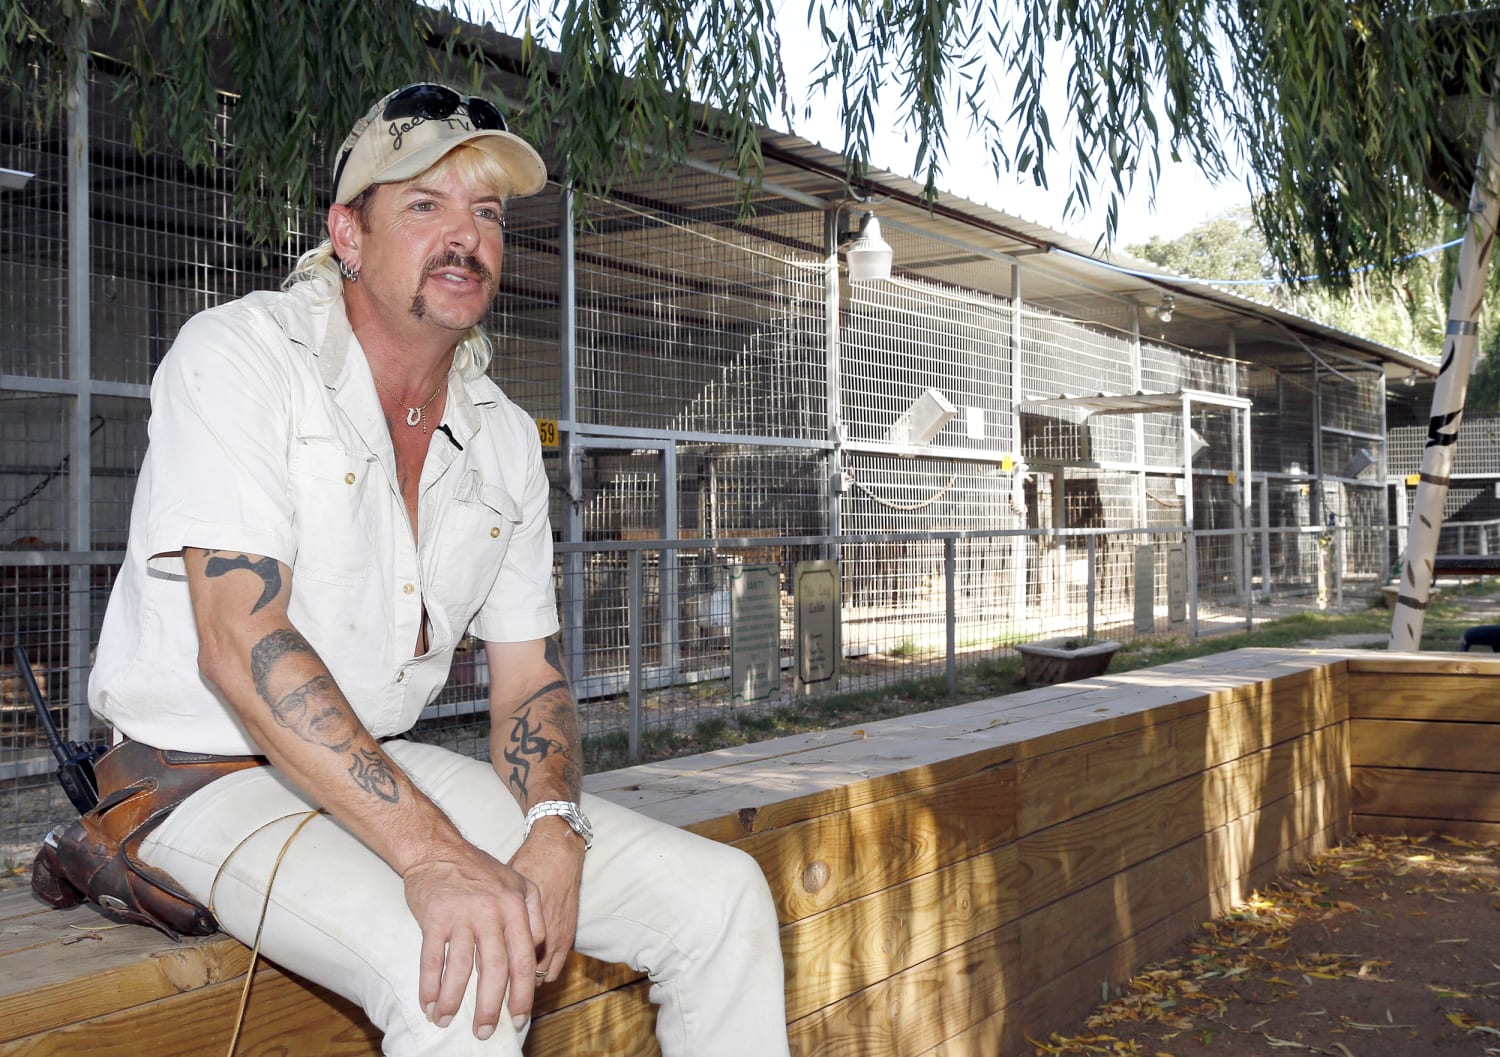 ‘Tiger King’ star Joe Exotic says he has aggressive form of cancer